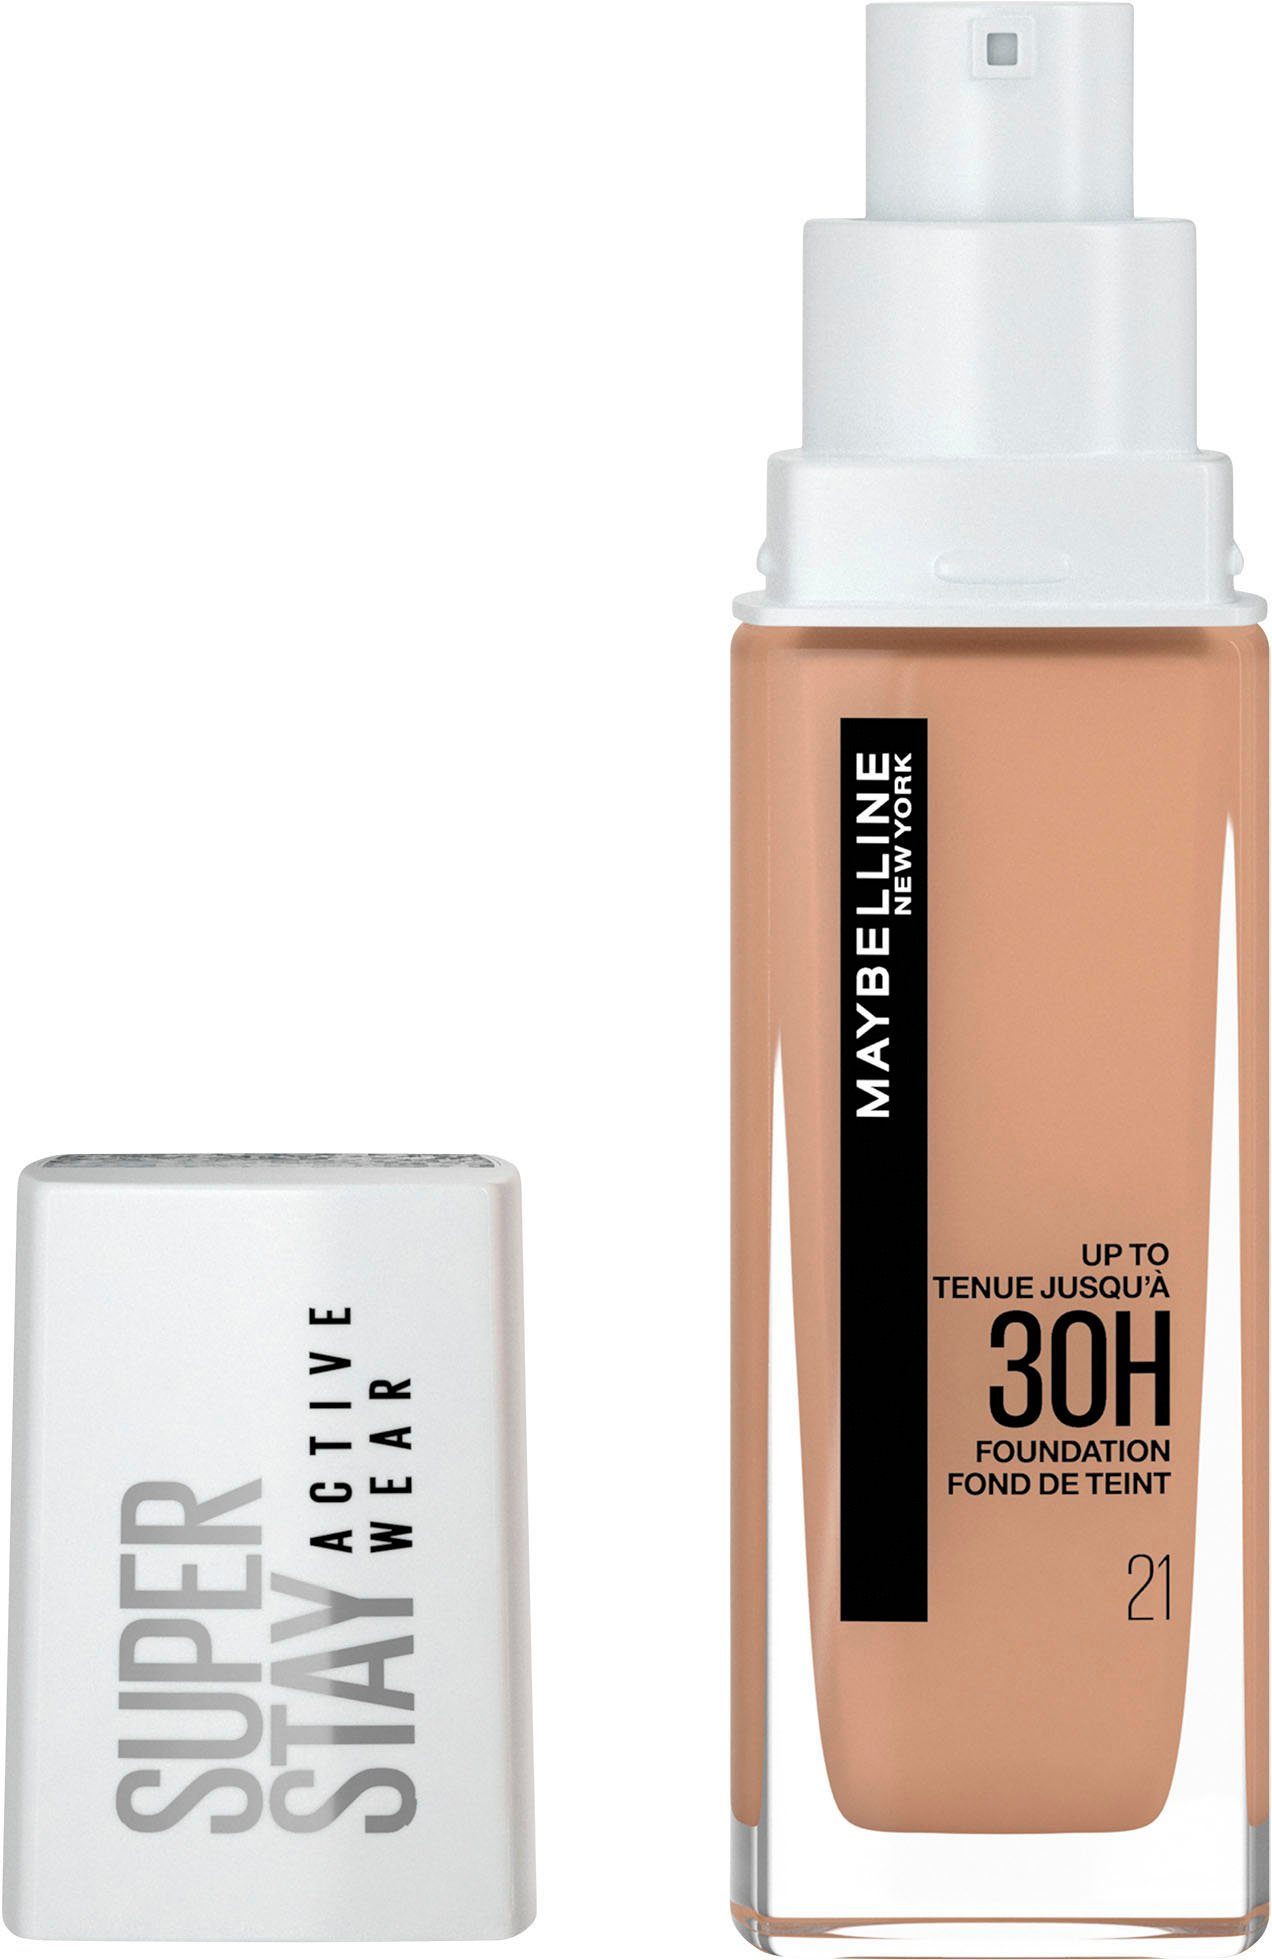 21 Nude YORK Beige Super MAYBELLINE Foundation Stay Wear NEW Active